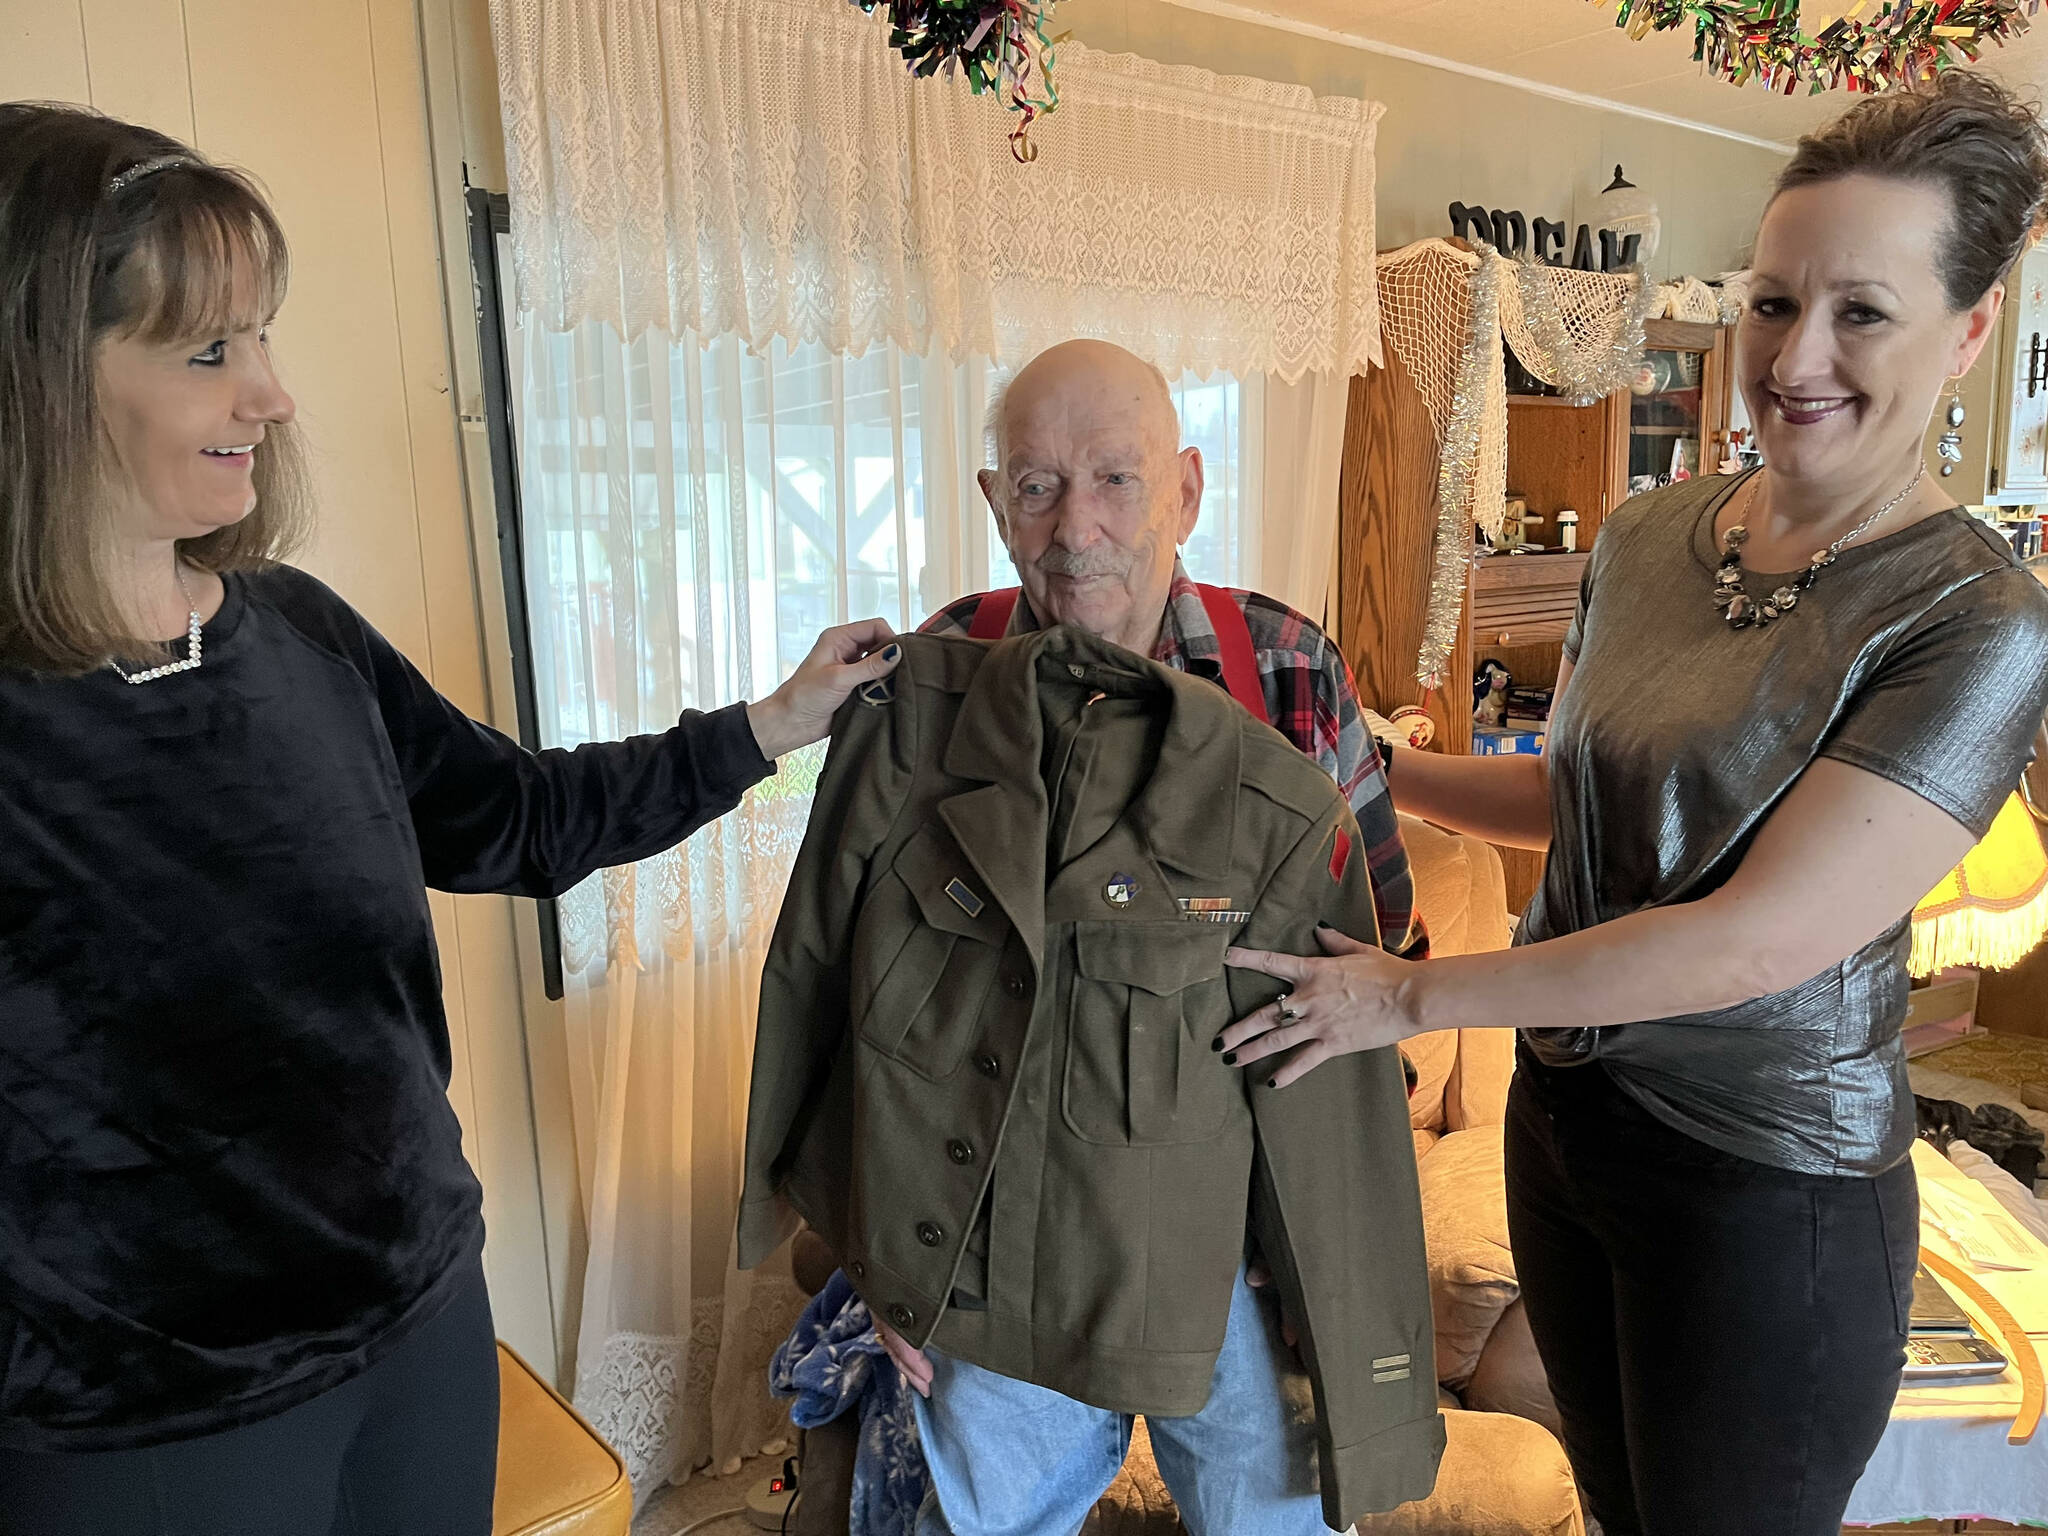 Matthew N. Wells | The Daily World 
Jodi Sund, left, and Jeri Bogar stand on both sides of their 97-year-old hero grandfather — U.S. Army Private First Class Harold Ralkey. Ralkey, who spoke about some of his experience on Friday, Nov. 26, 2021, at his mobile home in Elma, served in the 5th Infantry Division in World War II.